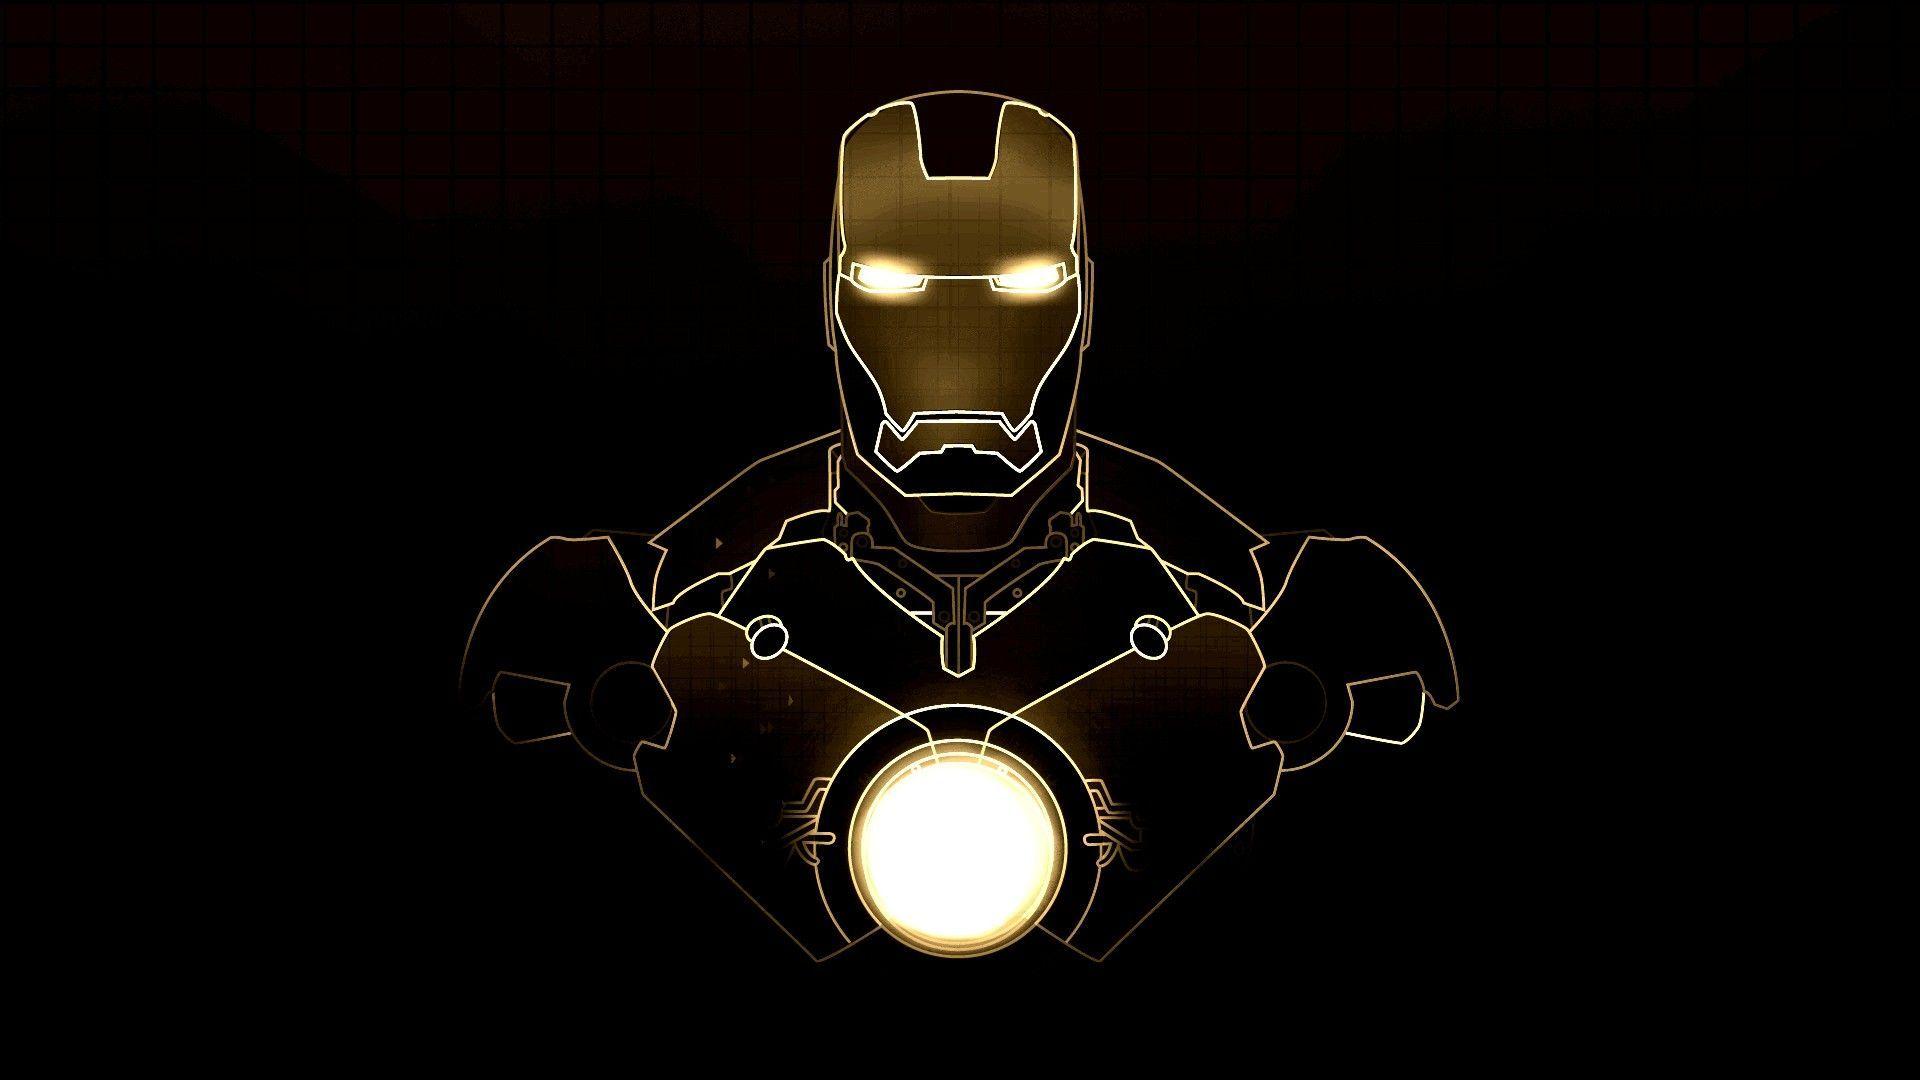 Iron Man is one of the most beloved series of Marvel